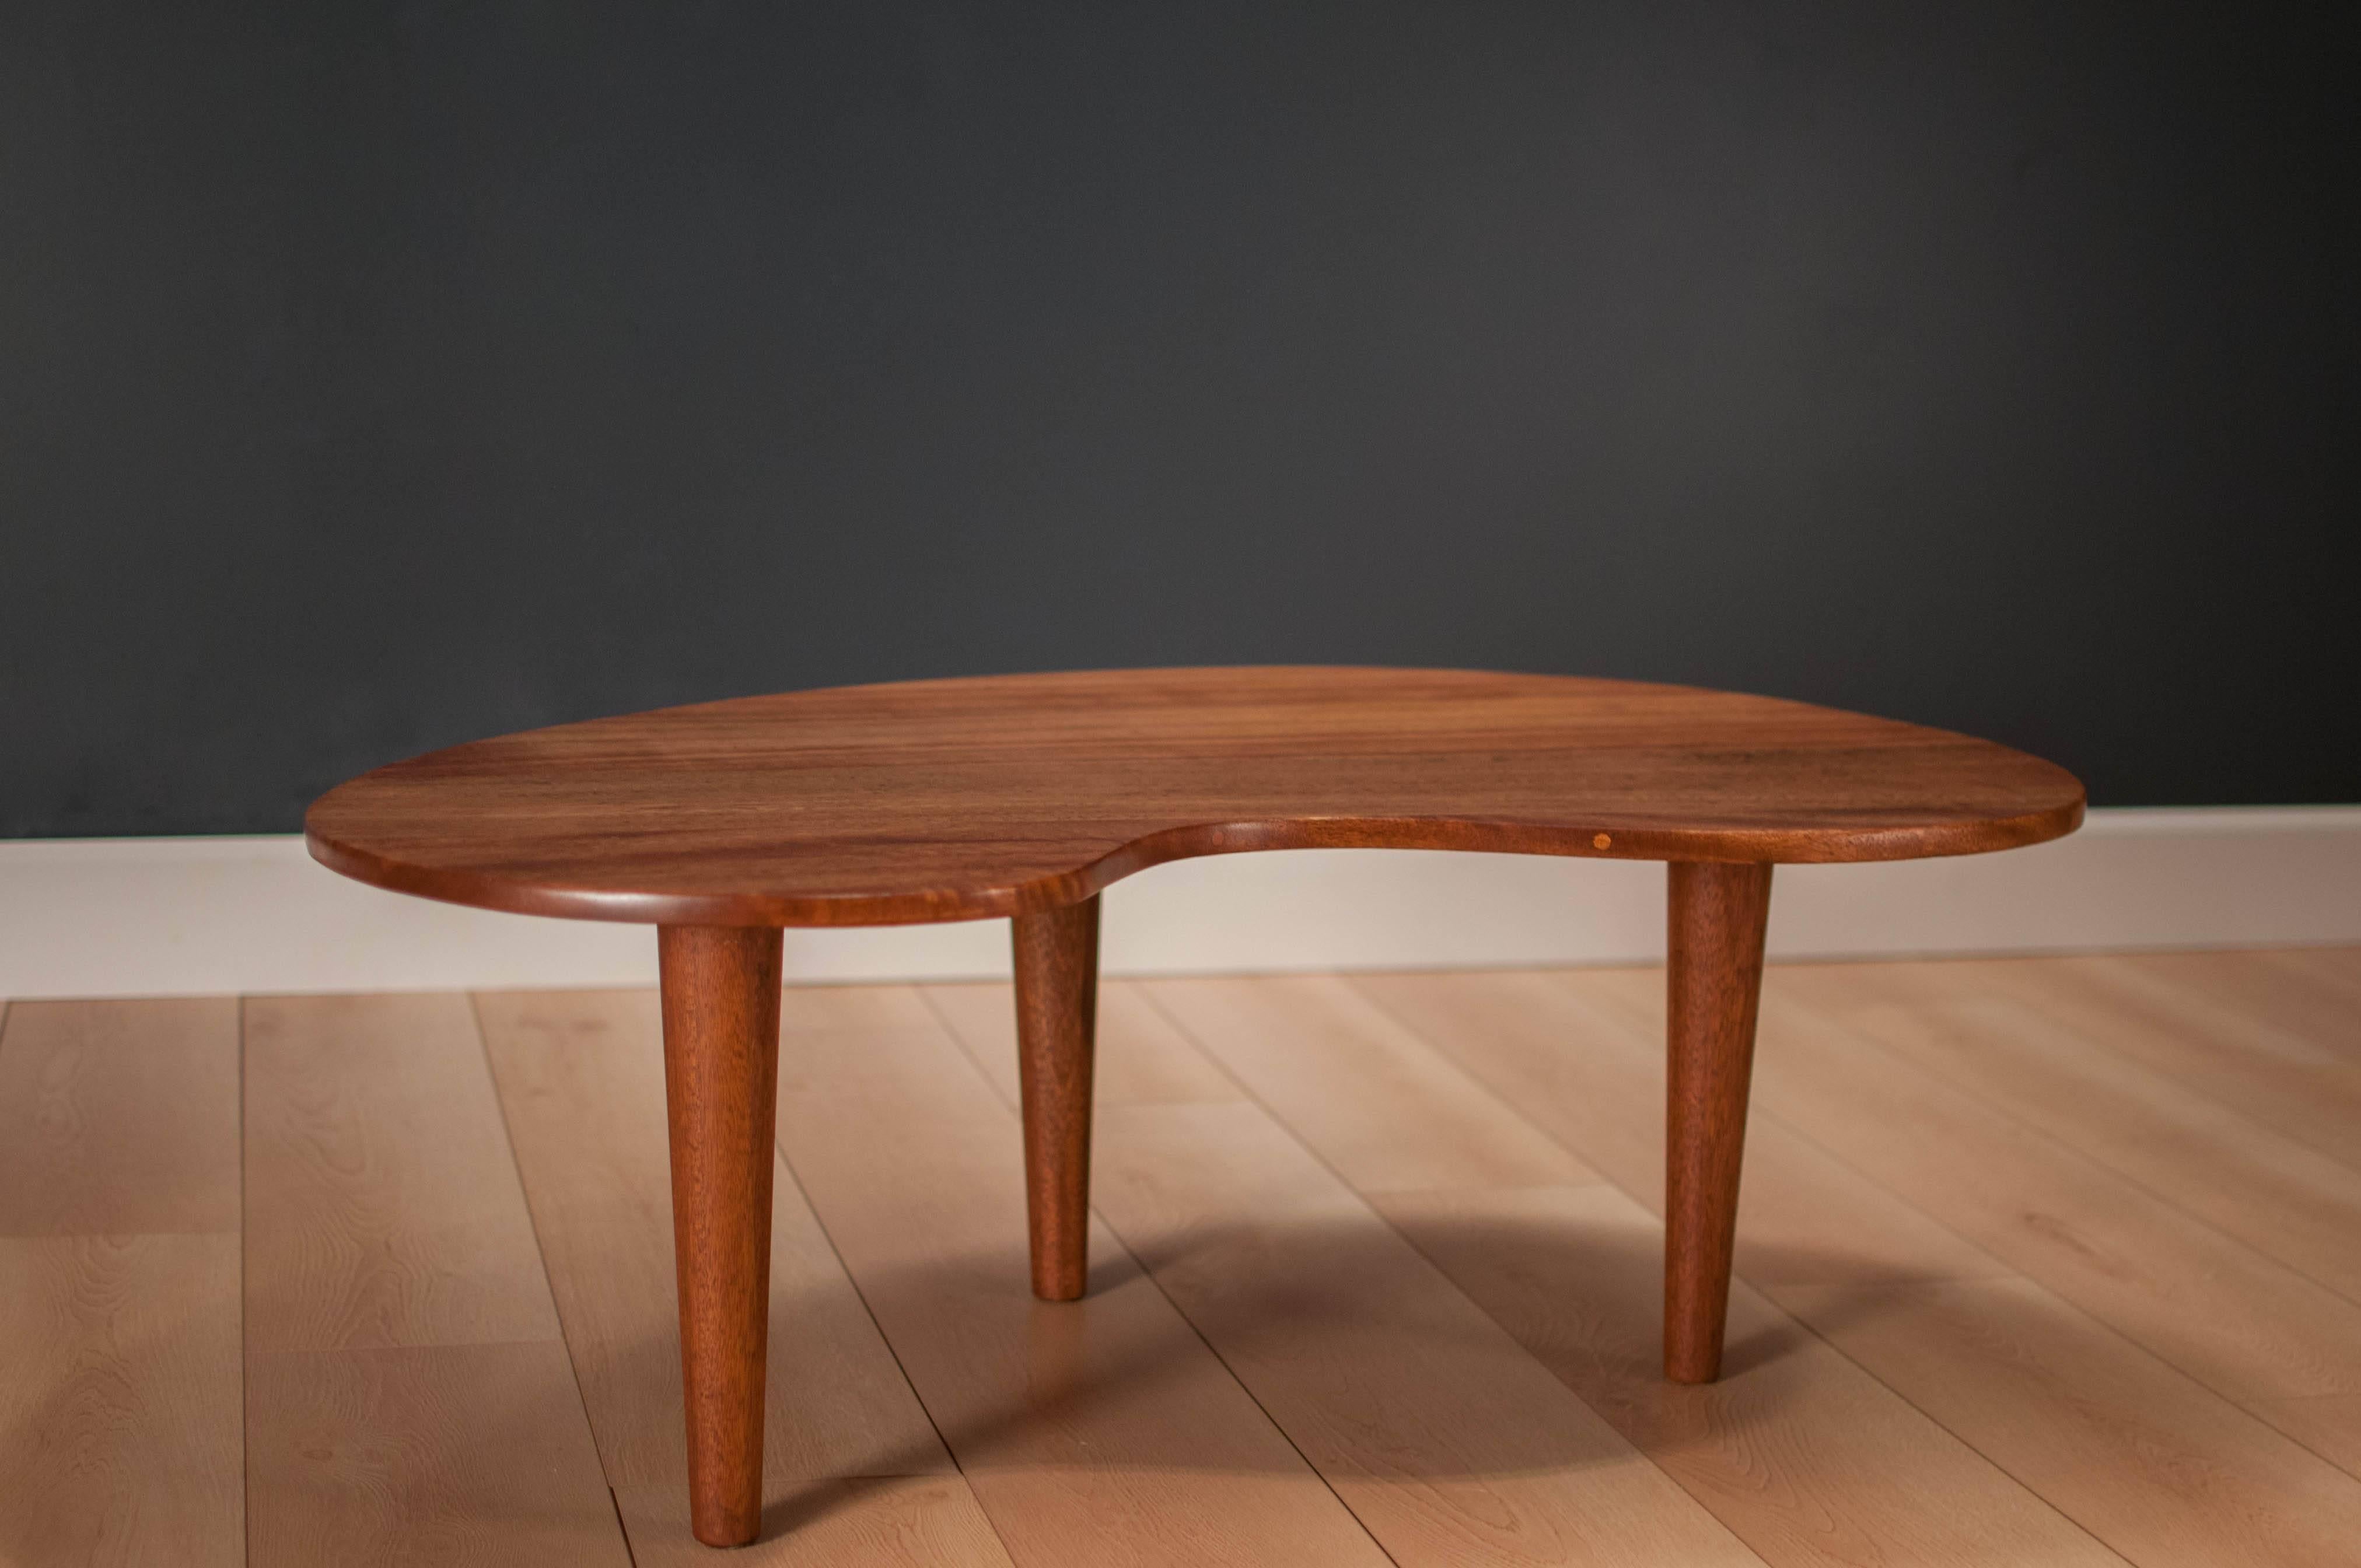 Mid-Century Modern kidney-shaped coffee table, circa 1960s. This piece has a solid planked mahogany top and three legged base. Makes for a great conversation piece.